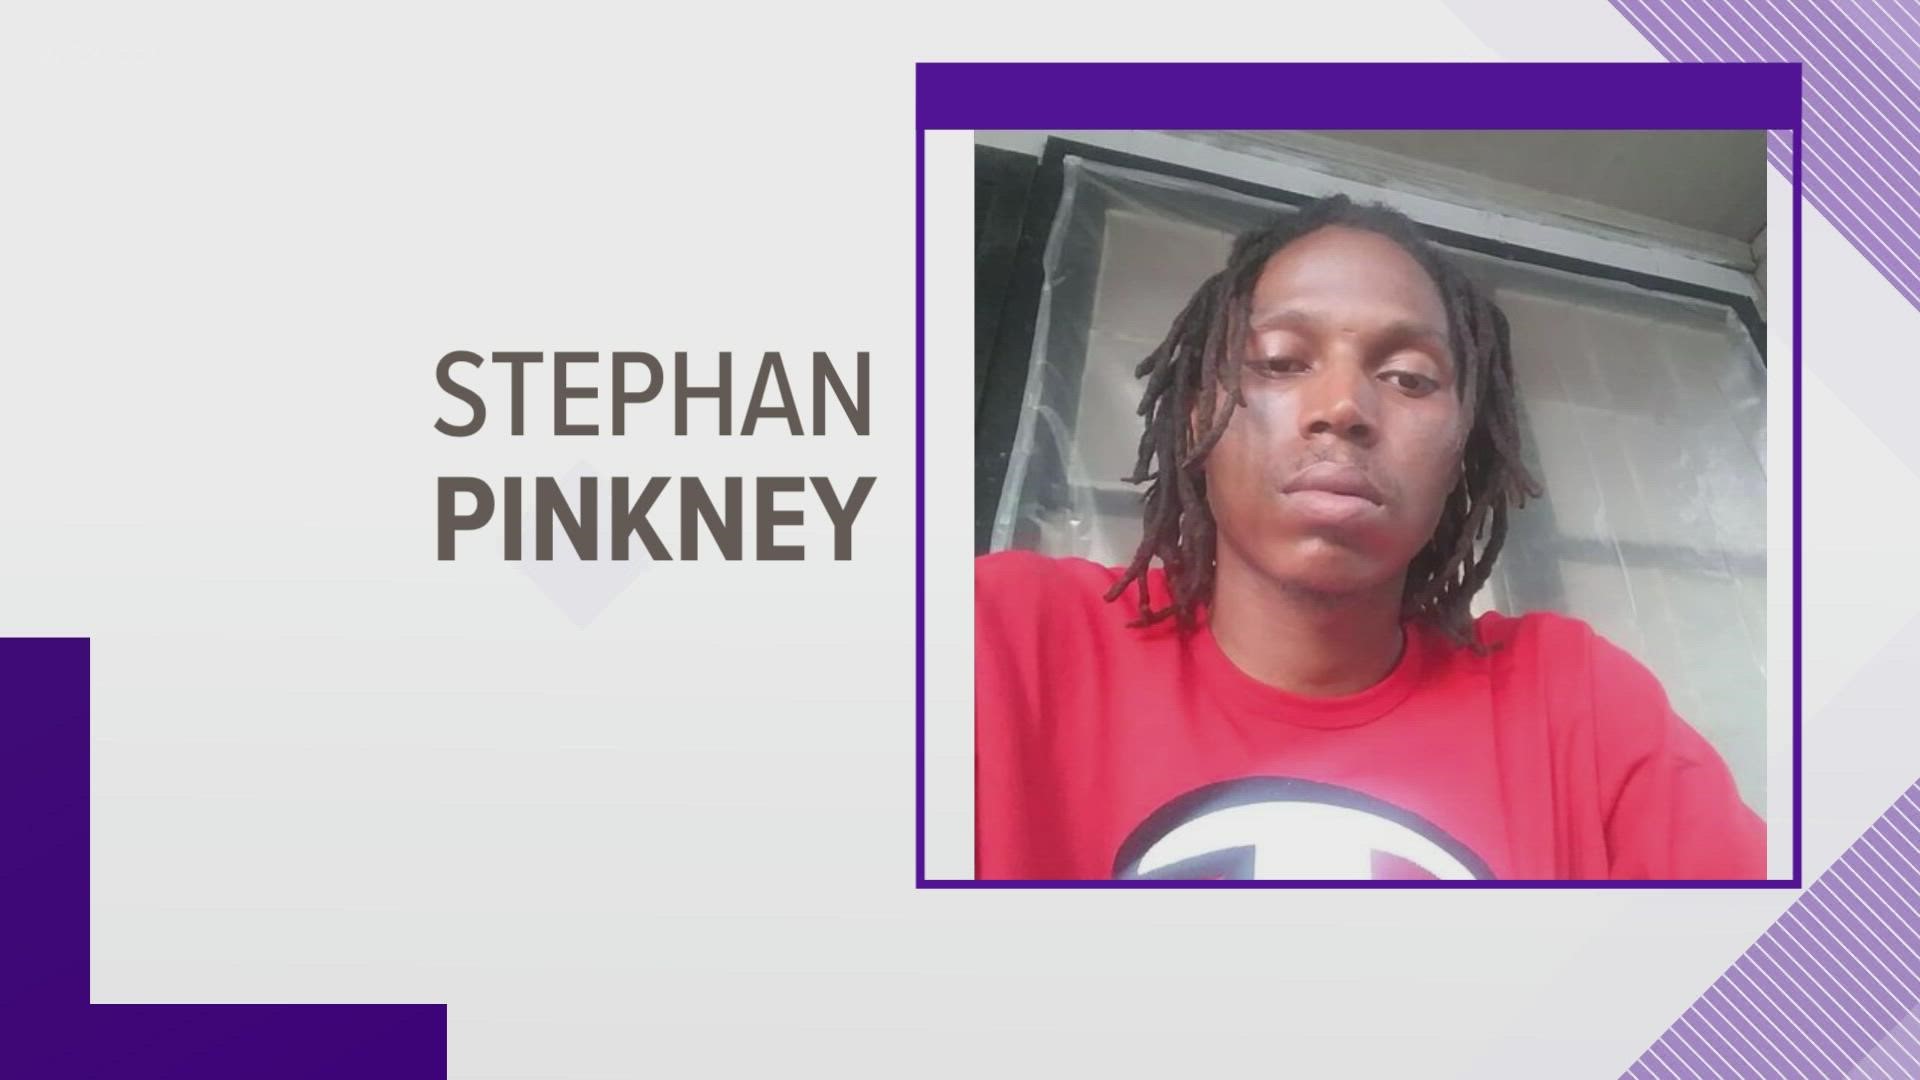 Investigators said that while Stephan Pinkney is homeless, he frequents an area where he has family. However, he hasn't been seen in several days.